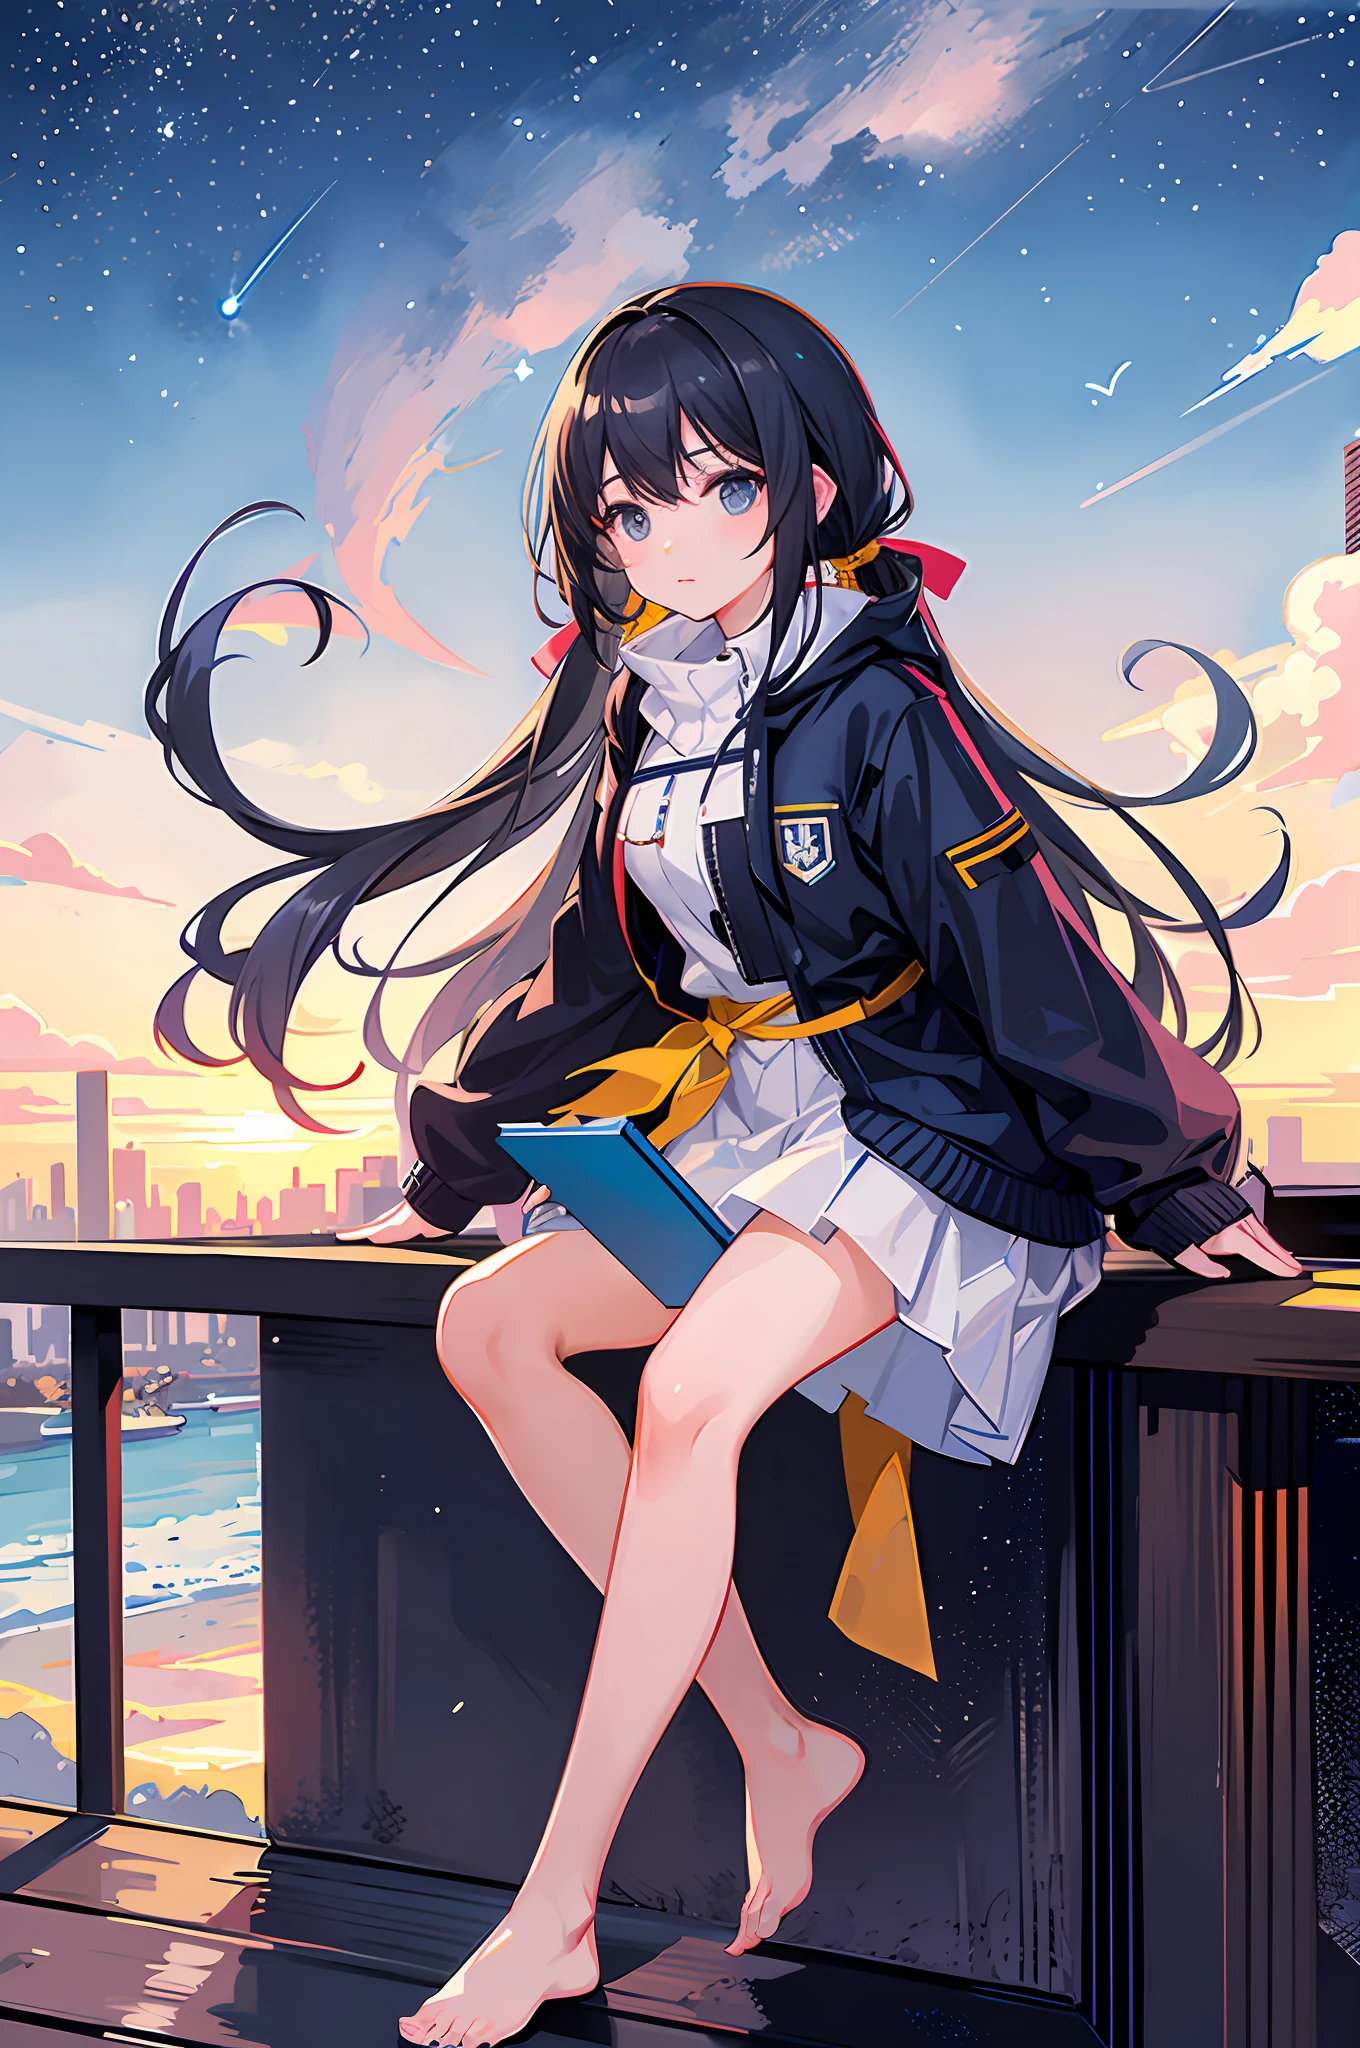 masterpiece, best quality,A beautiful Pigtail girl sits on the roof of the building,There are some whales flying in the starry sky, with a super wide angle view,The background is the extremely beautiful star sky. Under the star sky is the aerial view of the city building,octans, sky, star (sky), scenery, starry sky, night, 1girl, night sky, solo, outdoors, building, cloud, milky way, sitting, tree, long hair, city, silhouette, cityscape